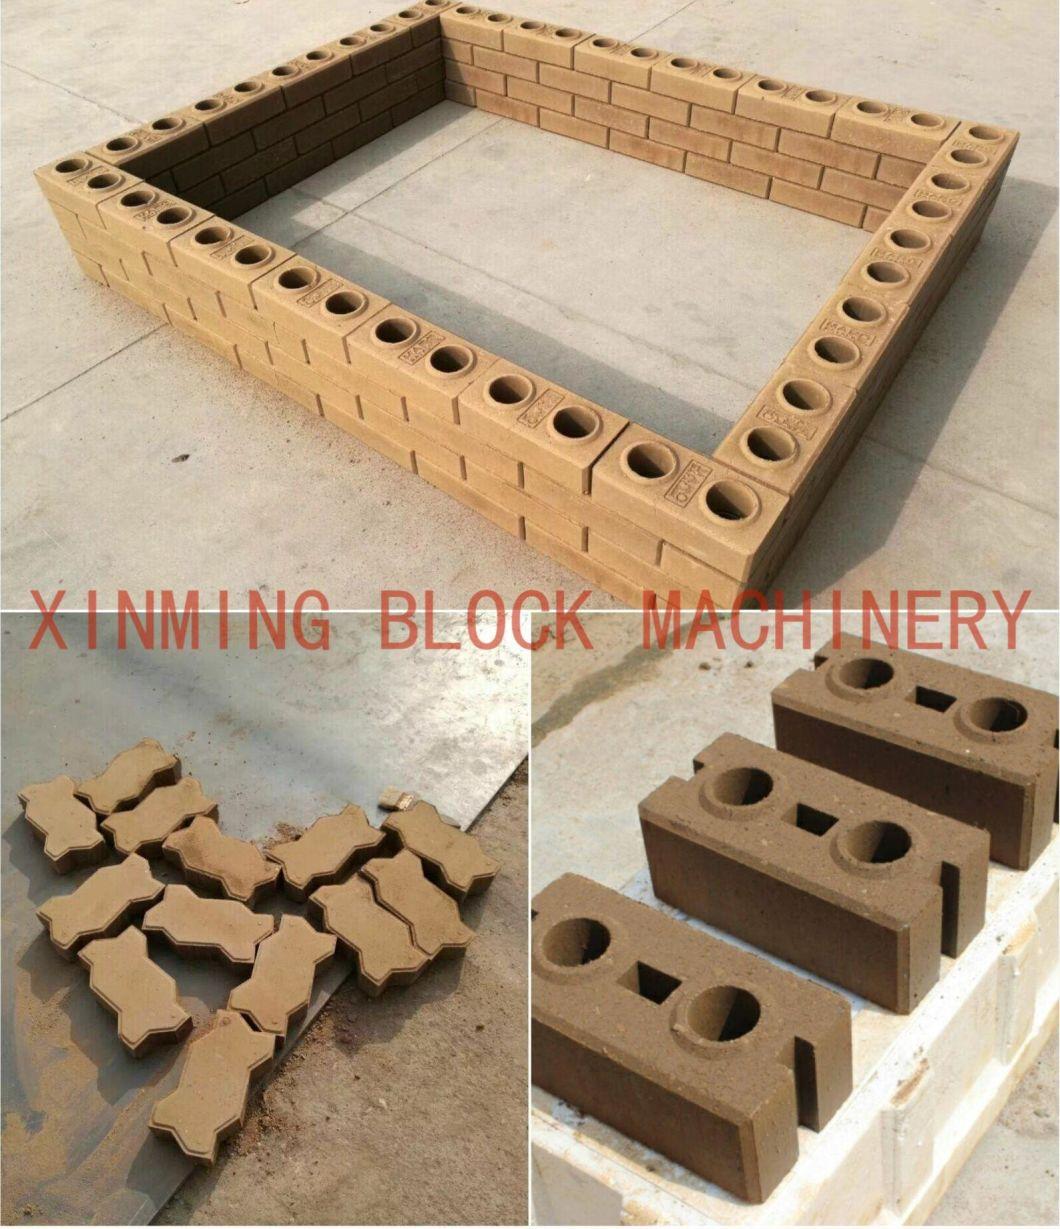 Brick Press Block Press Block Making Machine Brick Making Machinexm 2-25 Semi Automatic Block Machine for Home or Commercial Use